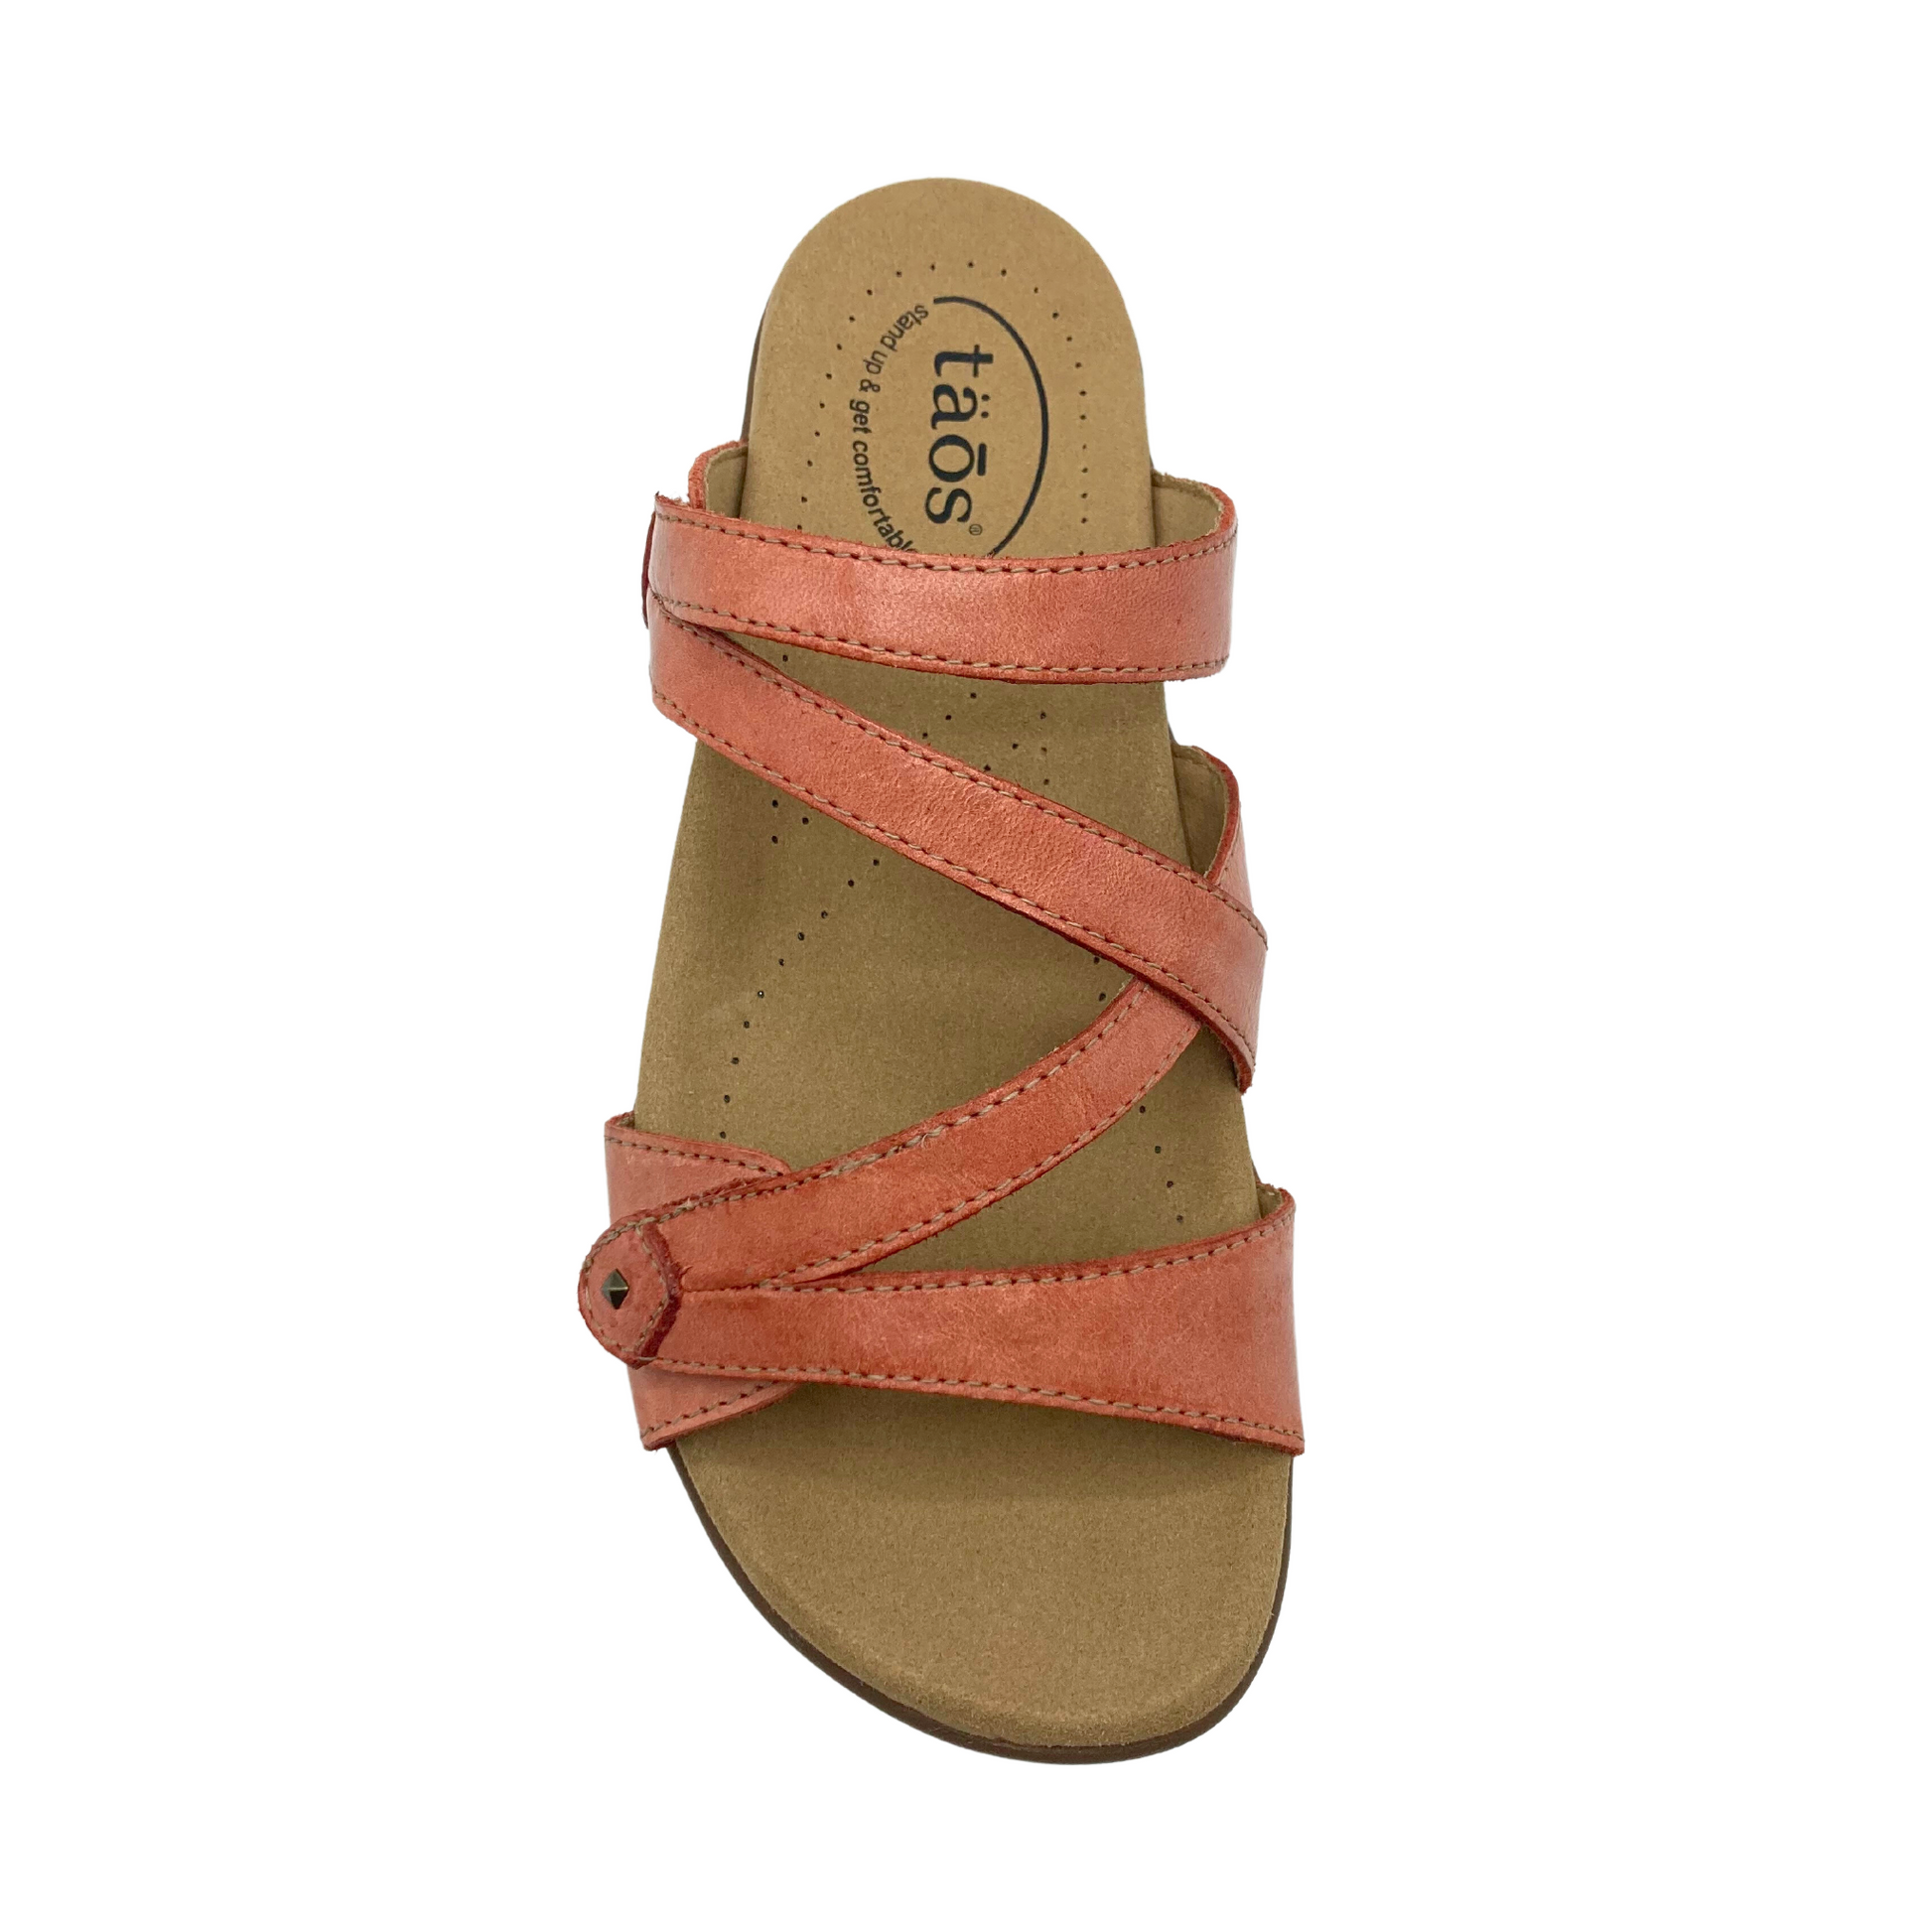 Top down view of right sandal in Taos Double U style color Bruschetta.  Adjustable cross straps at both forefoot and top provide great stability and support.